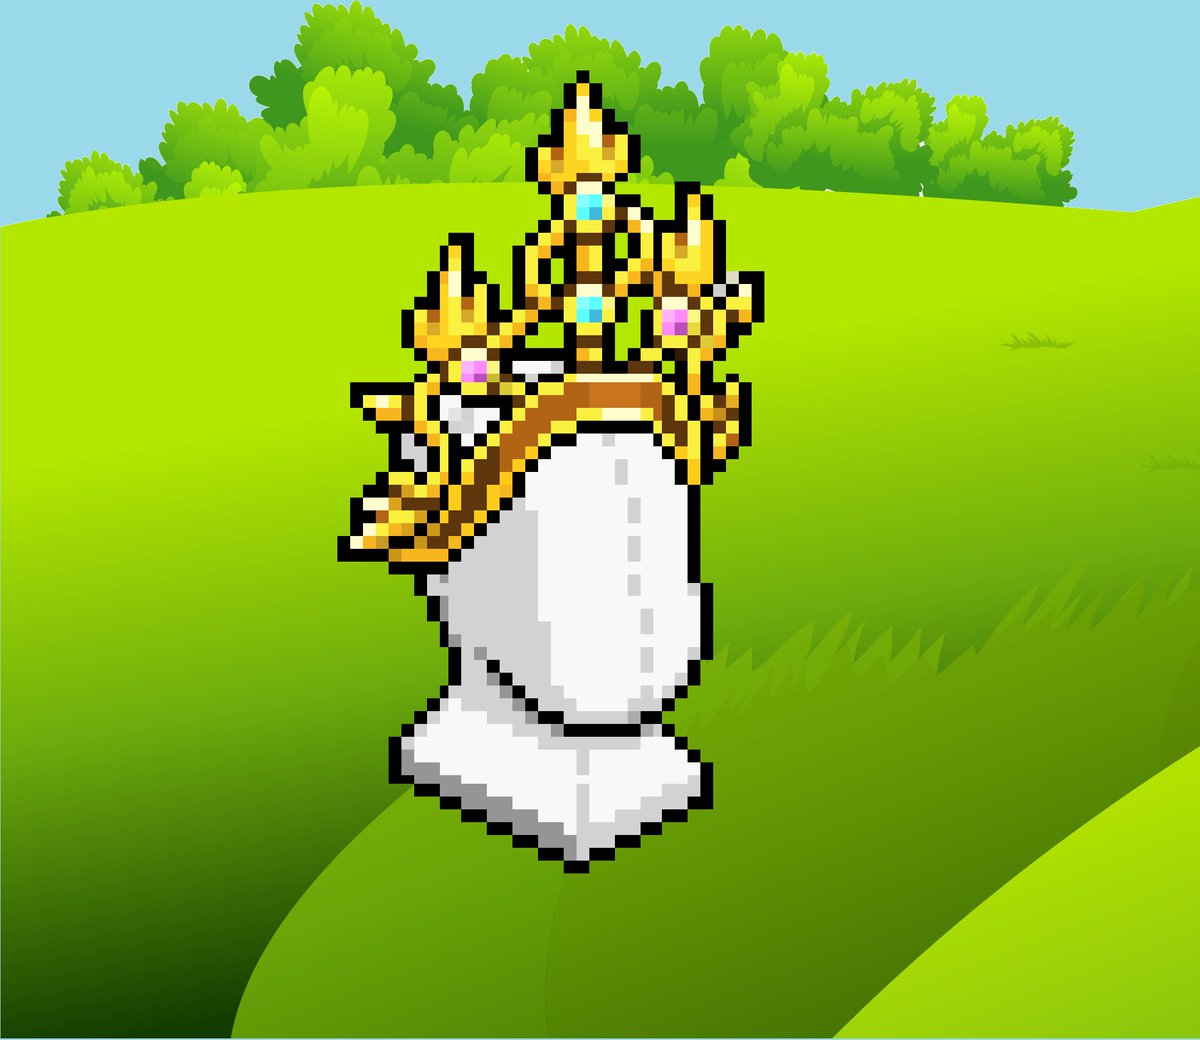 GIVEAWAY TIME!Want to win yourself an imperial crown?FollowRe-tweetEnds Thursday http://Habbo.com  Only! #Habbo